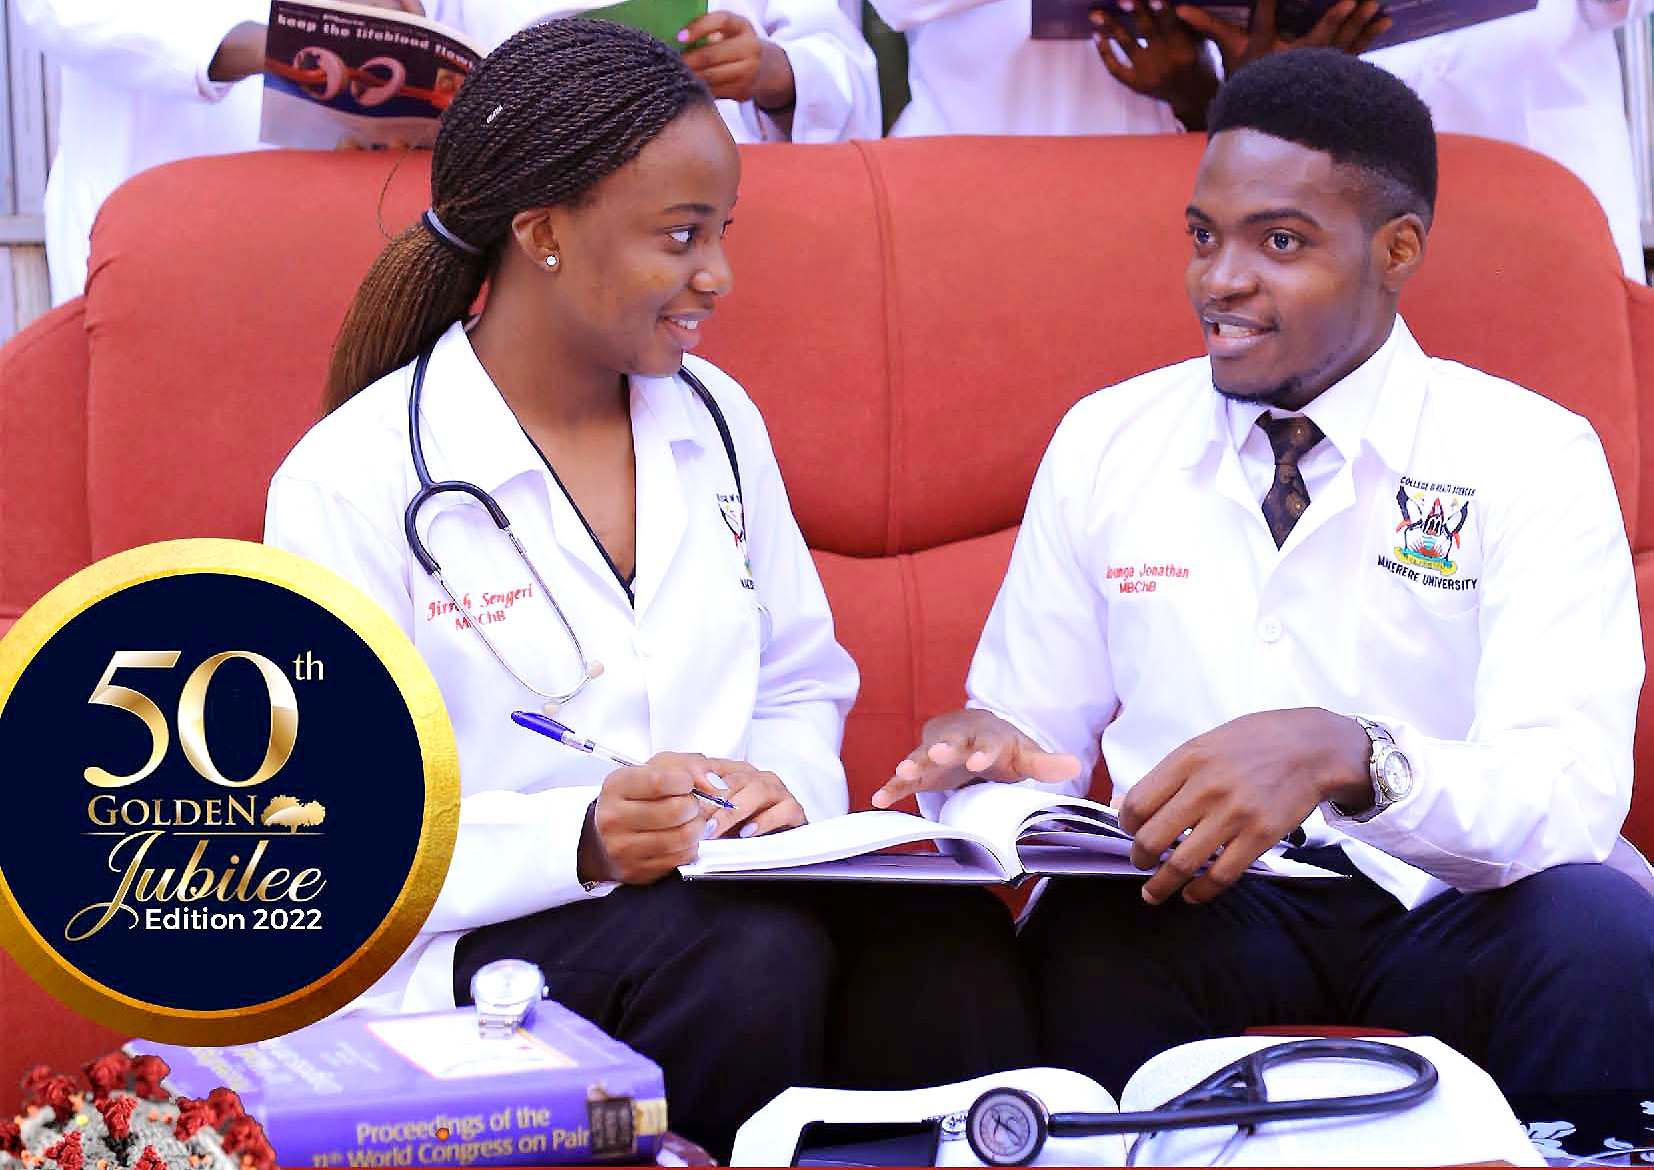 Cover Page of the Makerere Medical Journal Golden Jubilee Edition 2022.